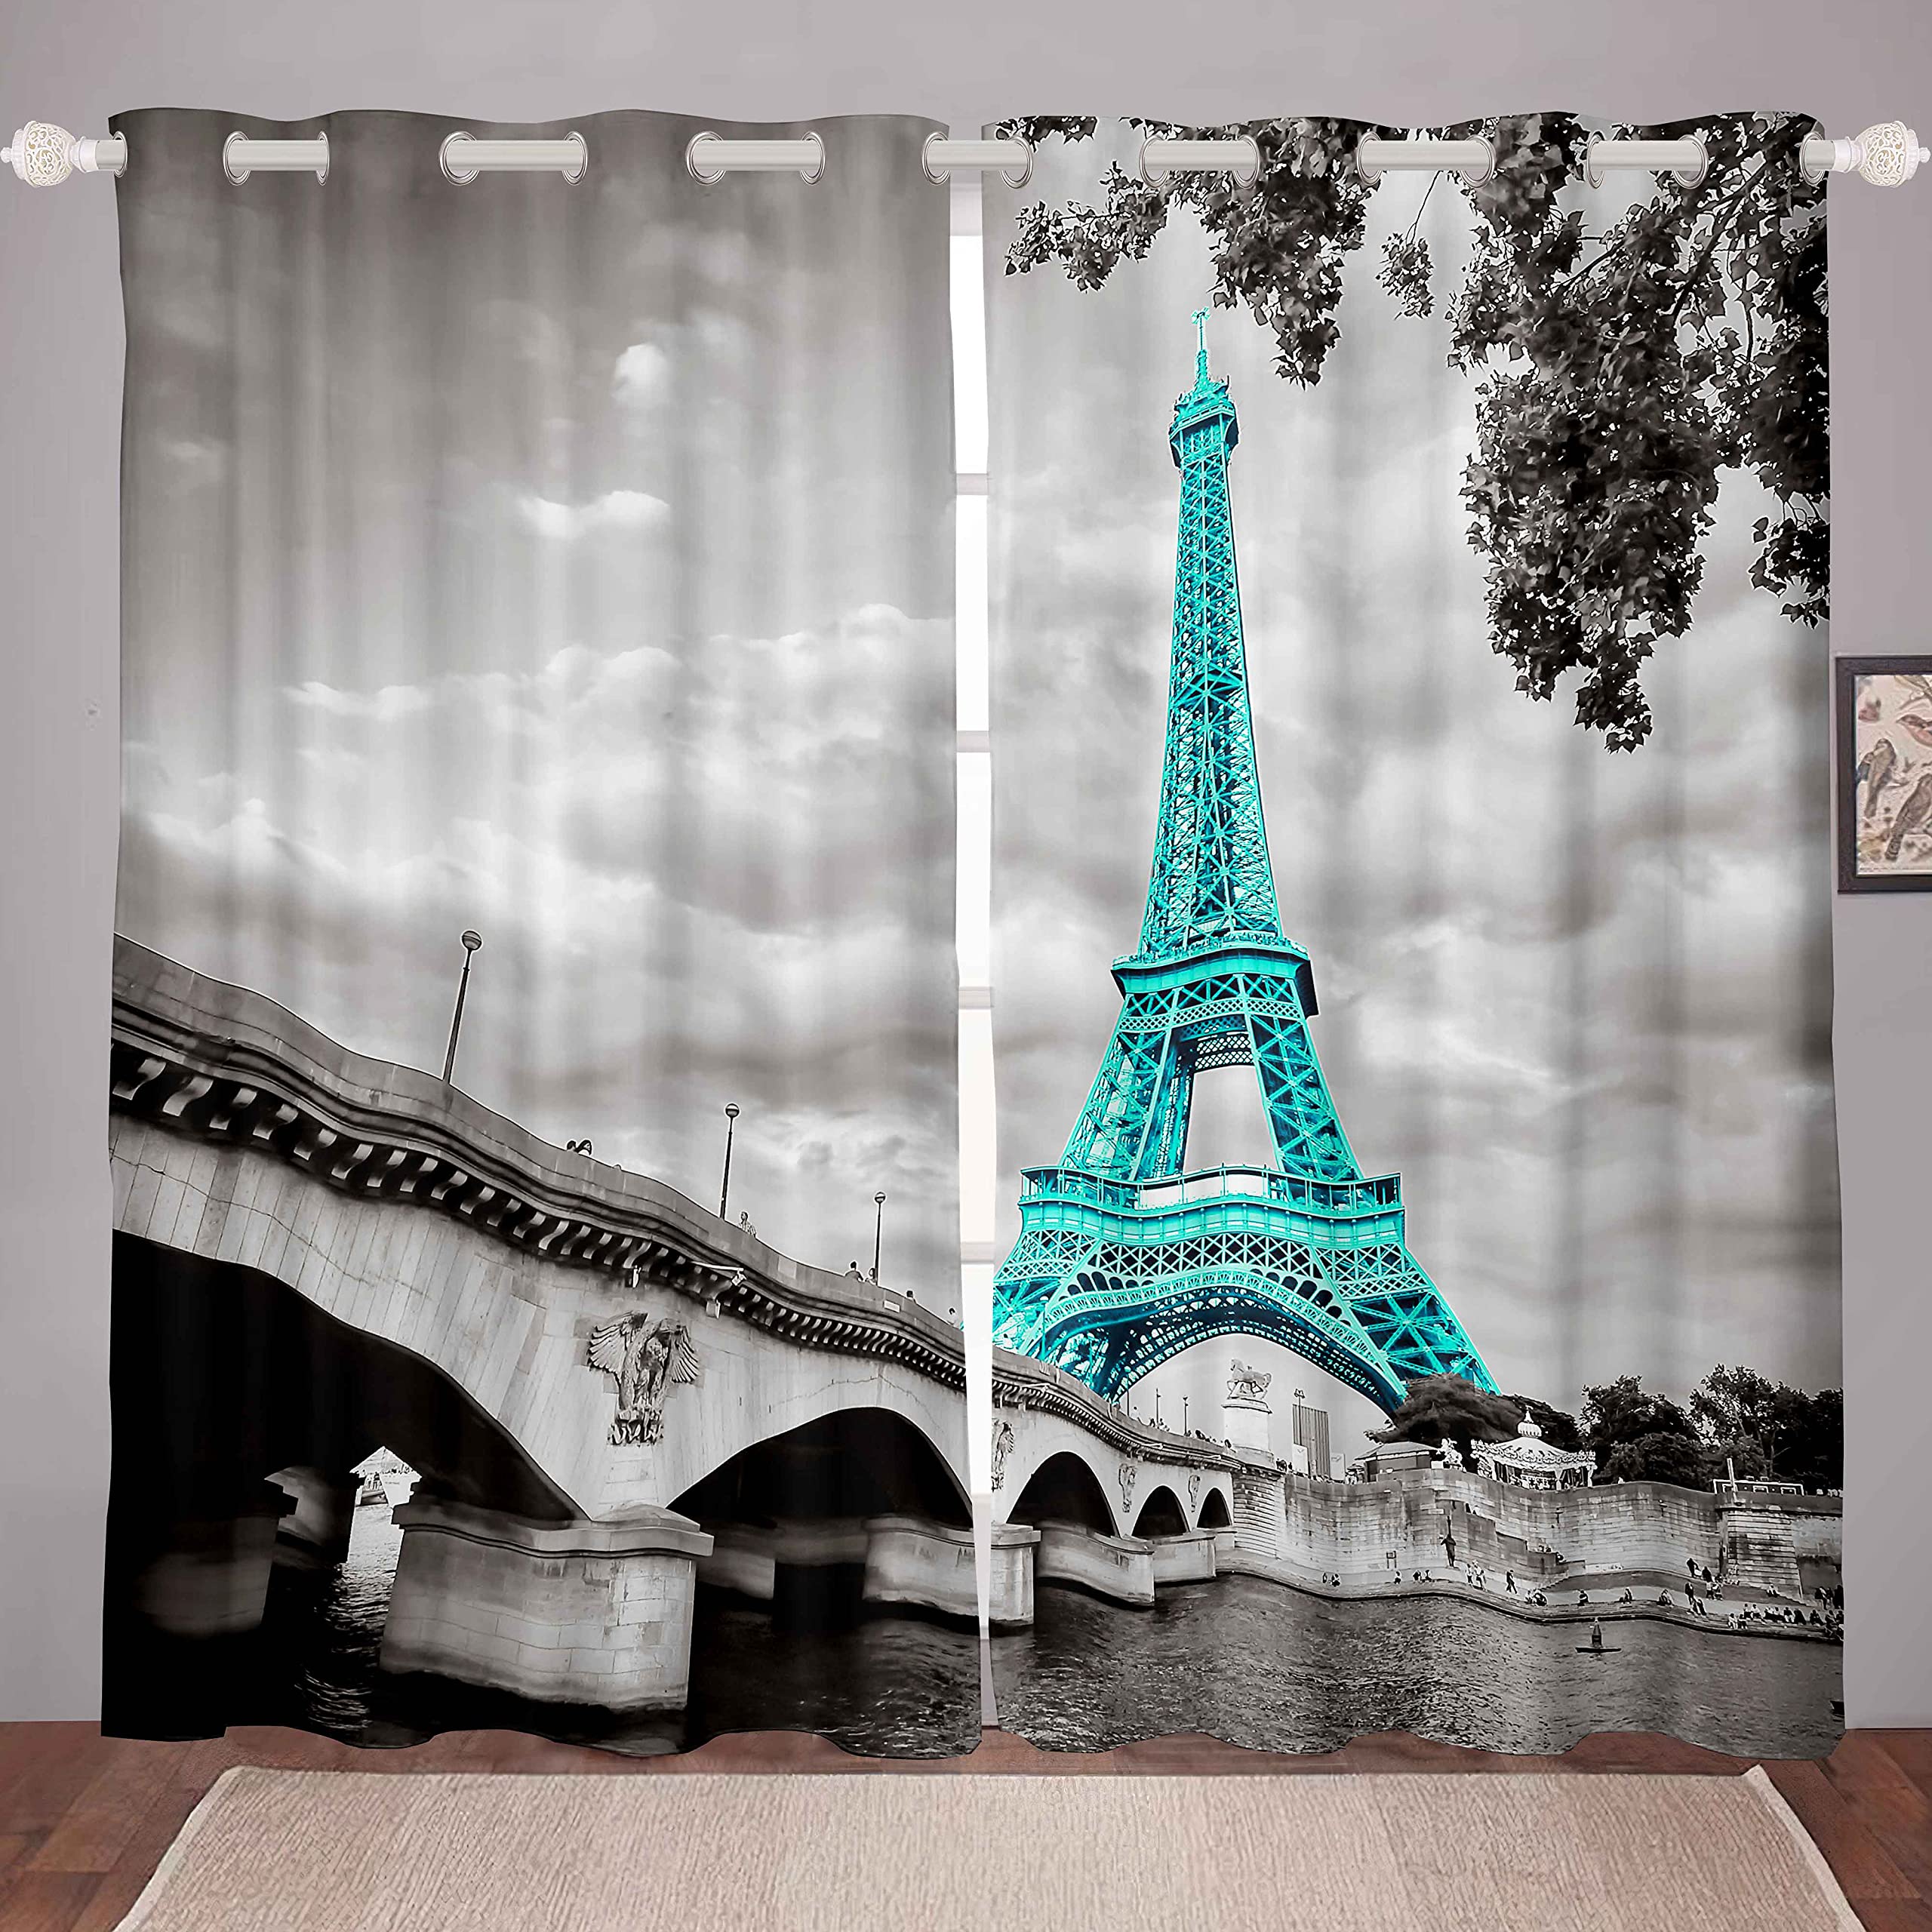 Dress Up Your Home in Style: Why Acrylic Bead Curtains Are a Chic & Affordable Choice